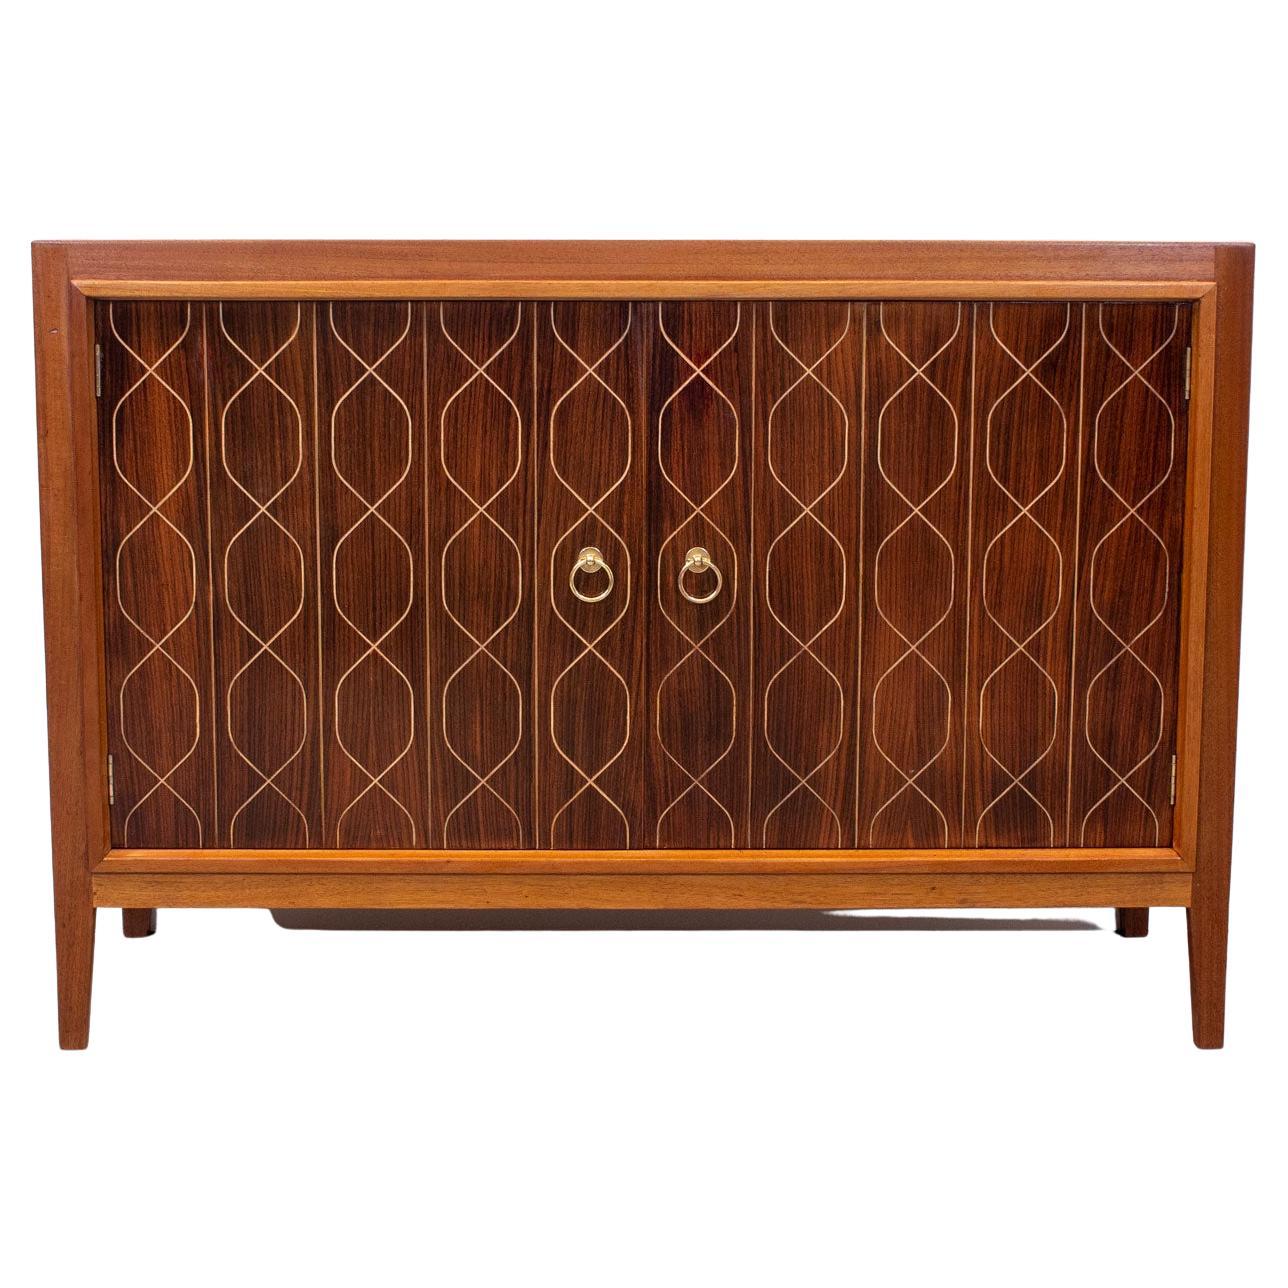 Double Helix Rosewood Sideboard by Gordon Russell, 1950s